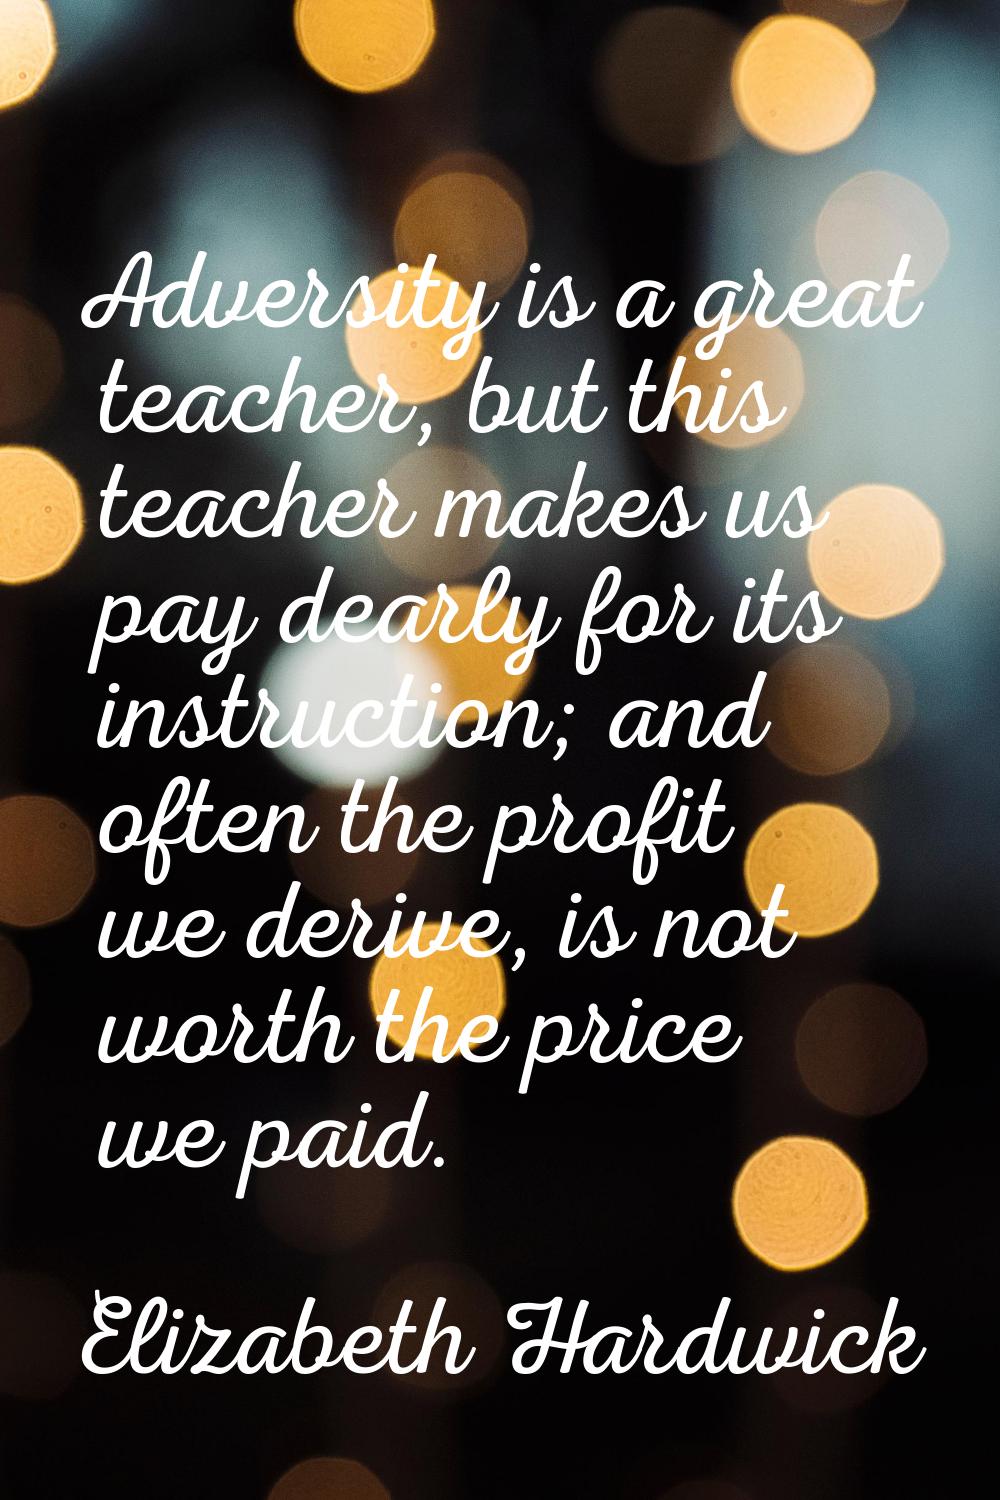 Adversity is a great teacher, but this teacher makes us pay dearly for its instruction; and often t